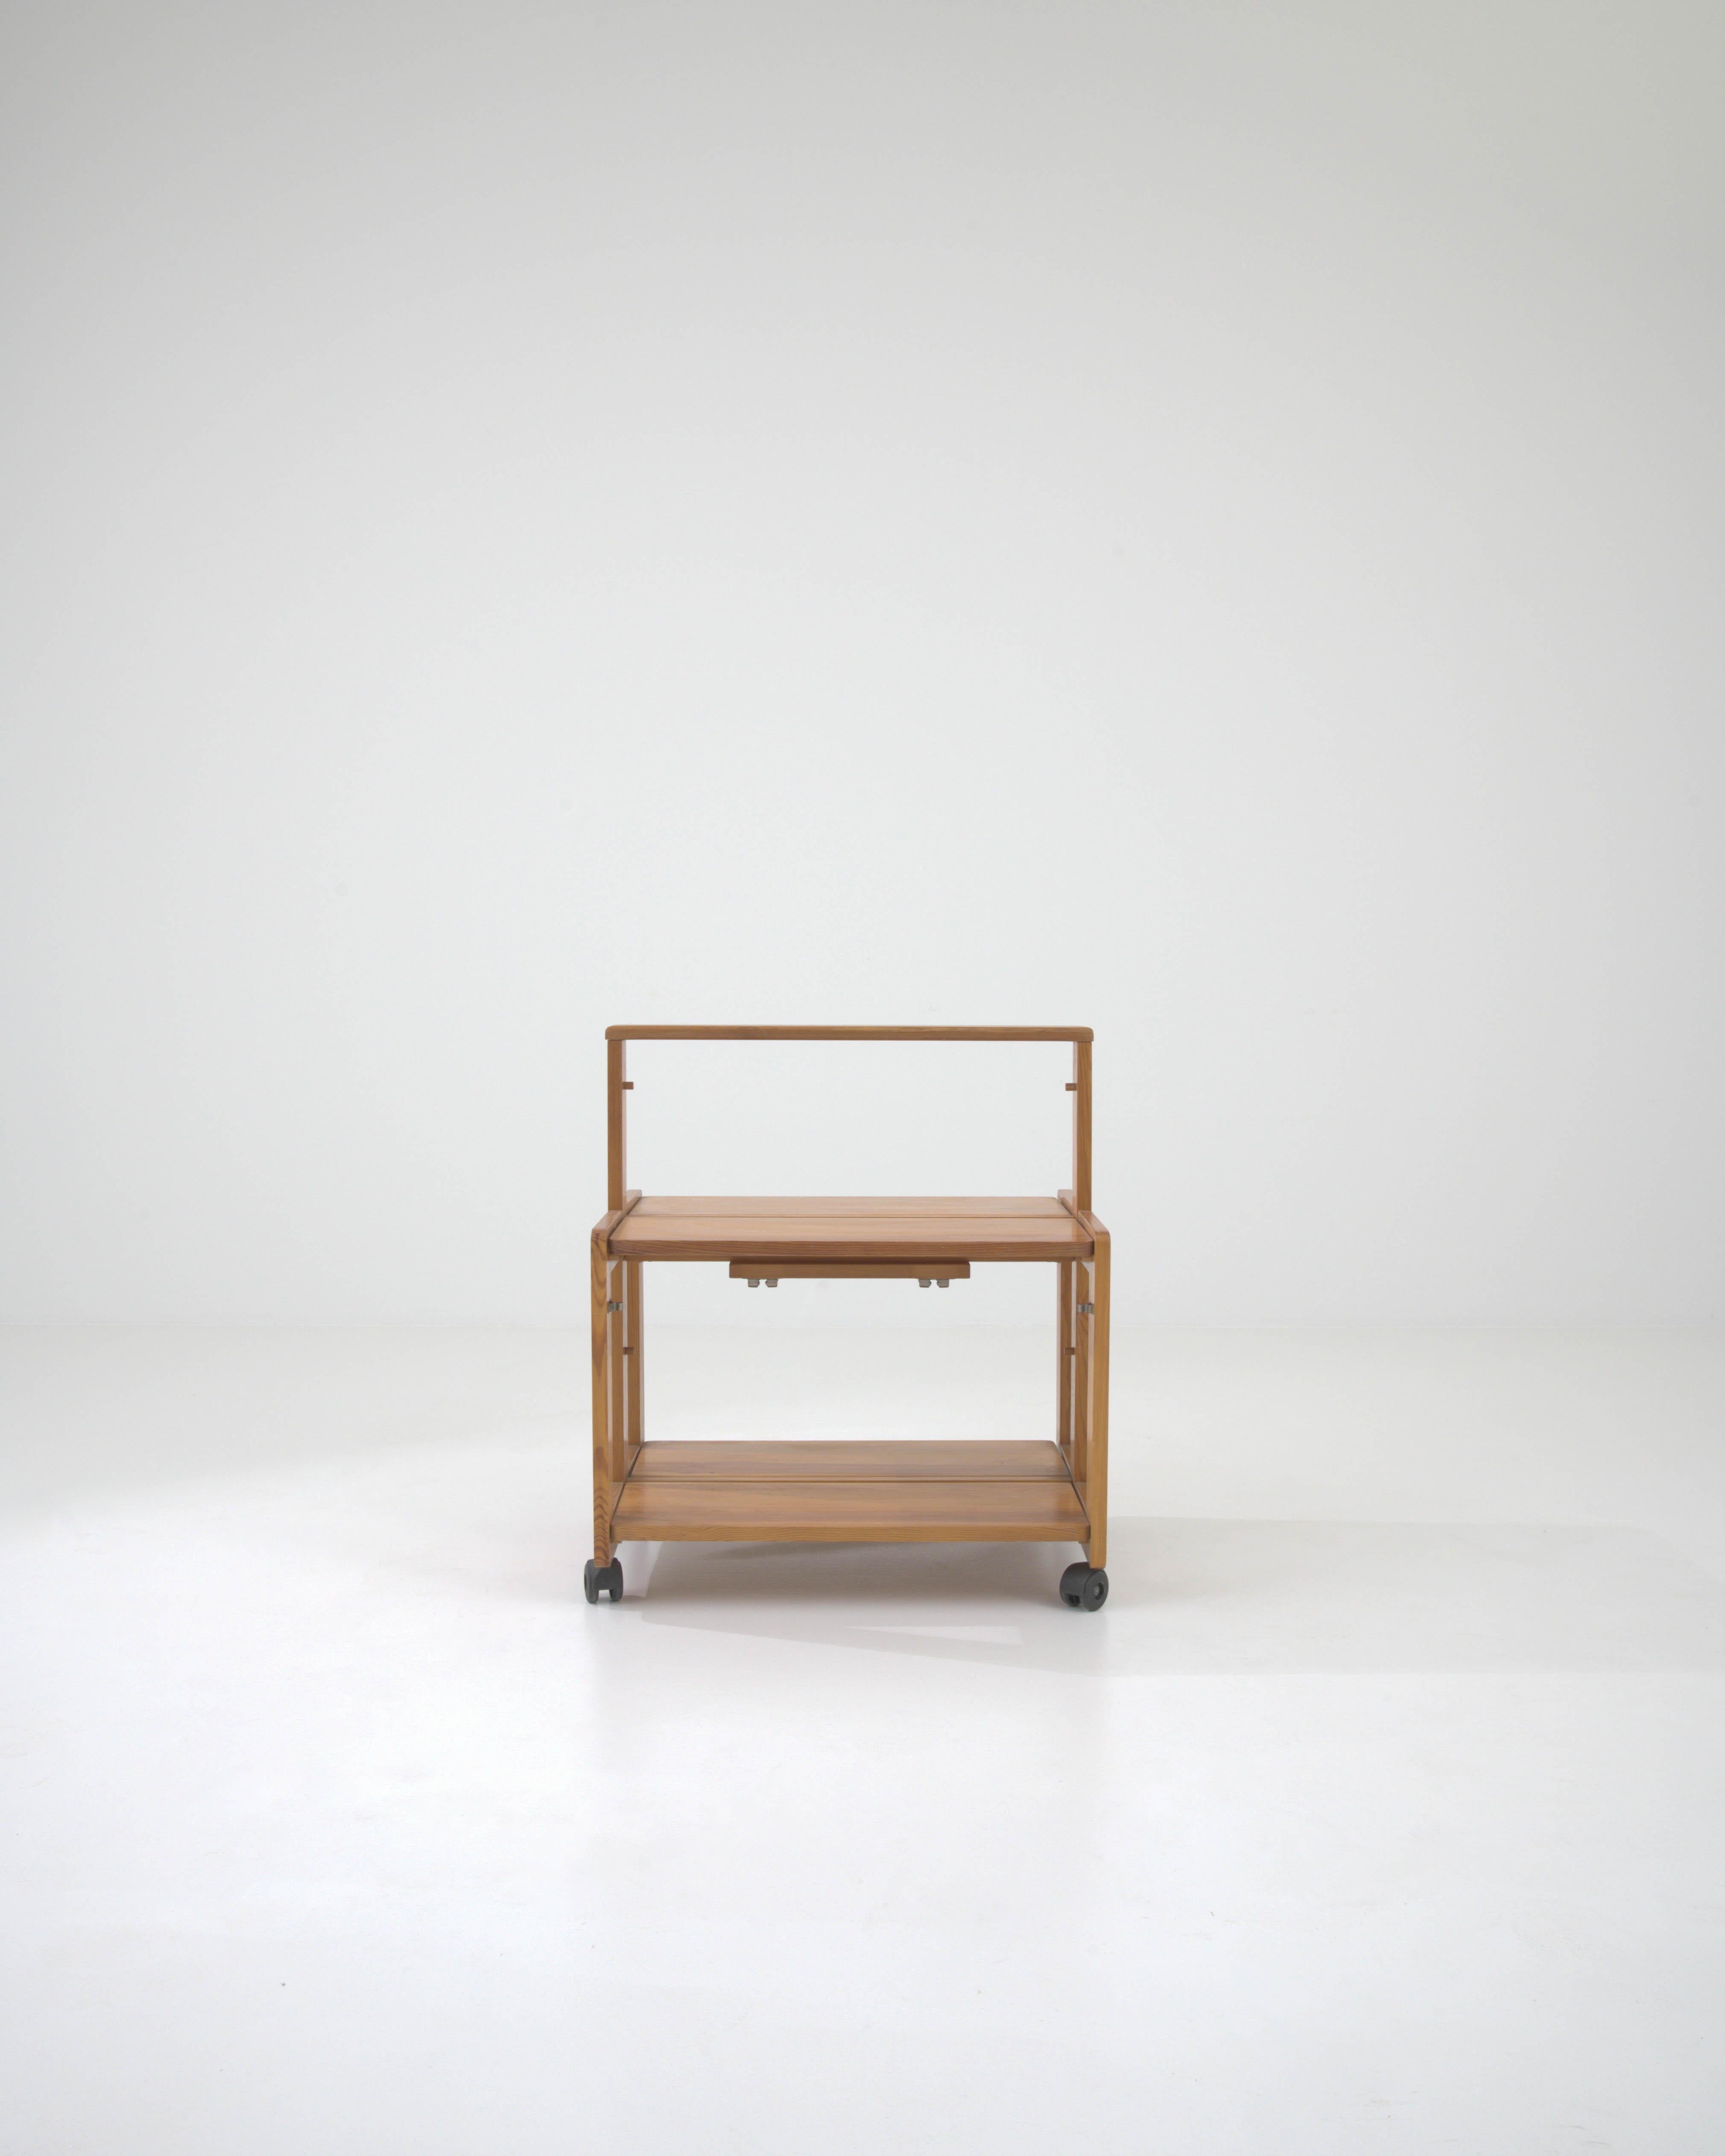 Experience the perfect blend of form and function with this mid-20th Century Swedish Wooden Bar Cart on Wheels. Its sleek, linear design showcases the simplicity and practicality that are hallmarks of Scandinavian craftsmanship. Constructed from